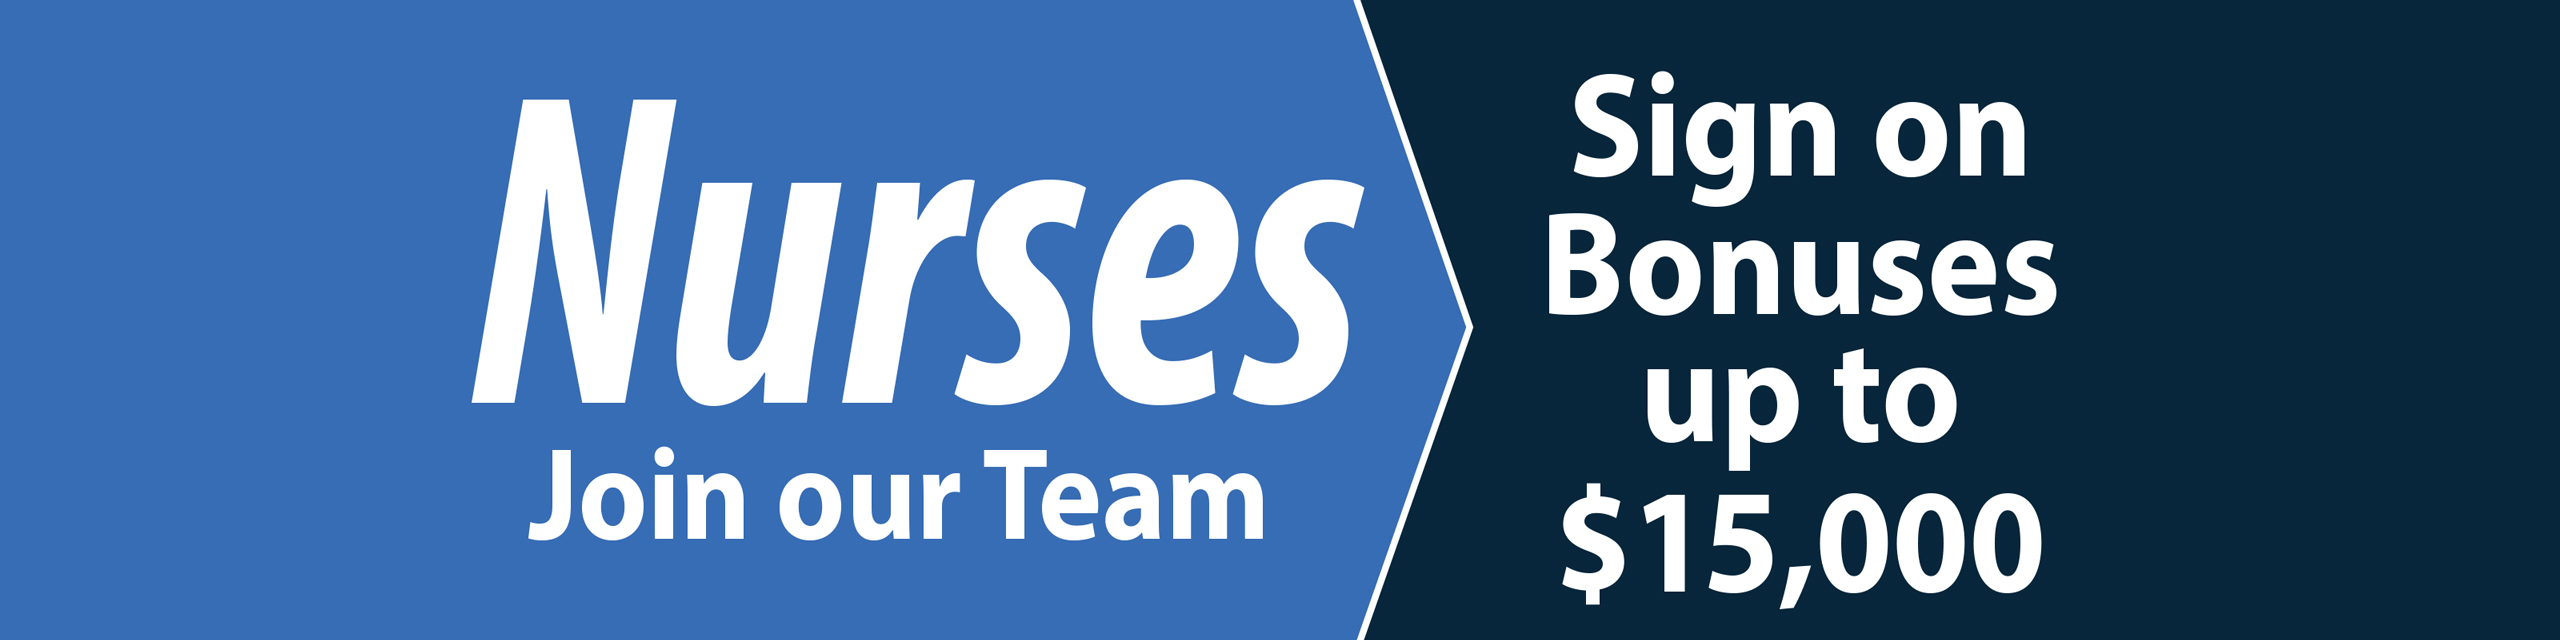 Nurses Join our Team Sign on Bonuses up to $15,000